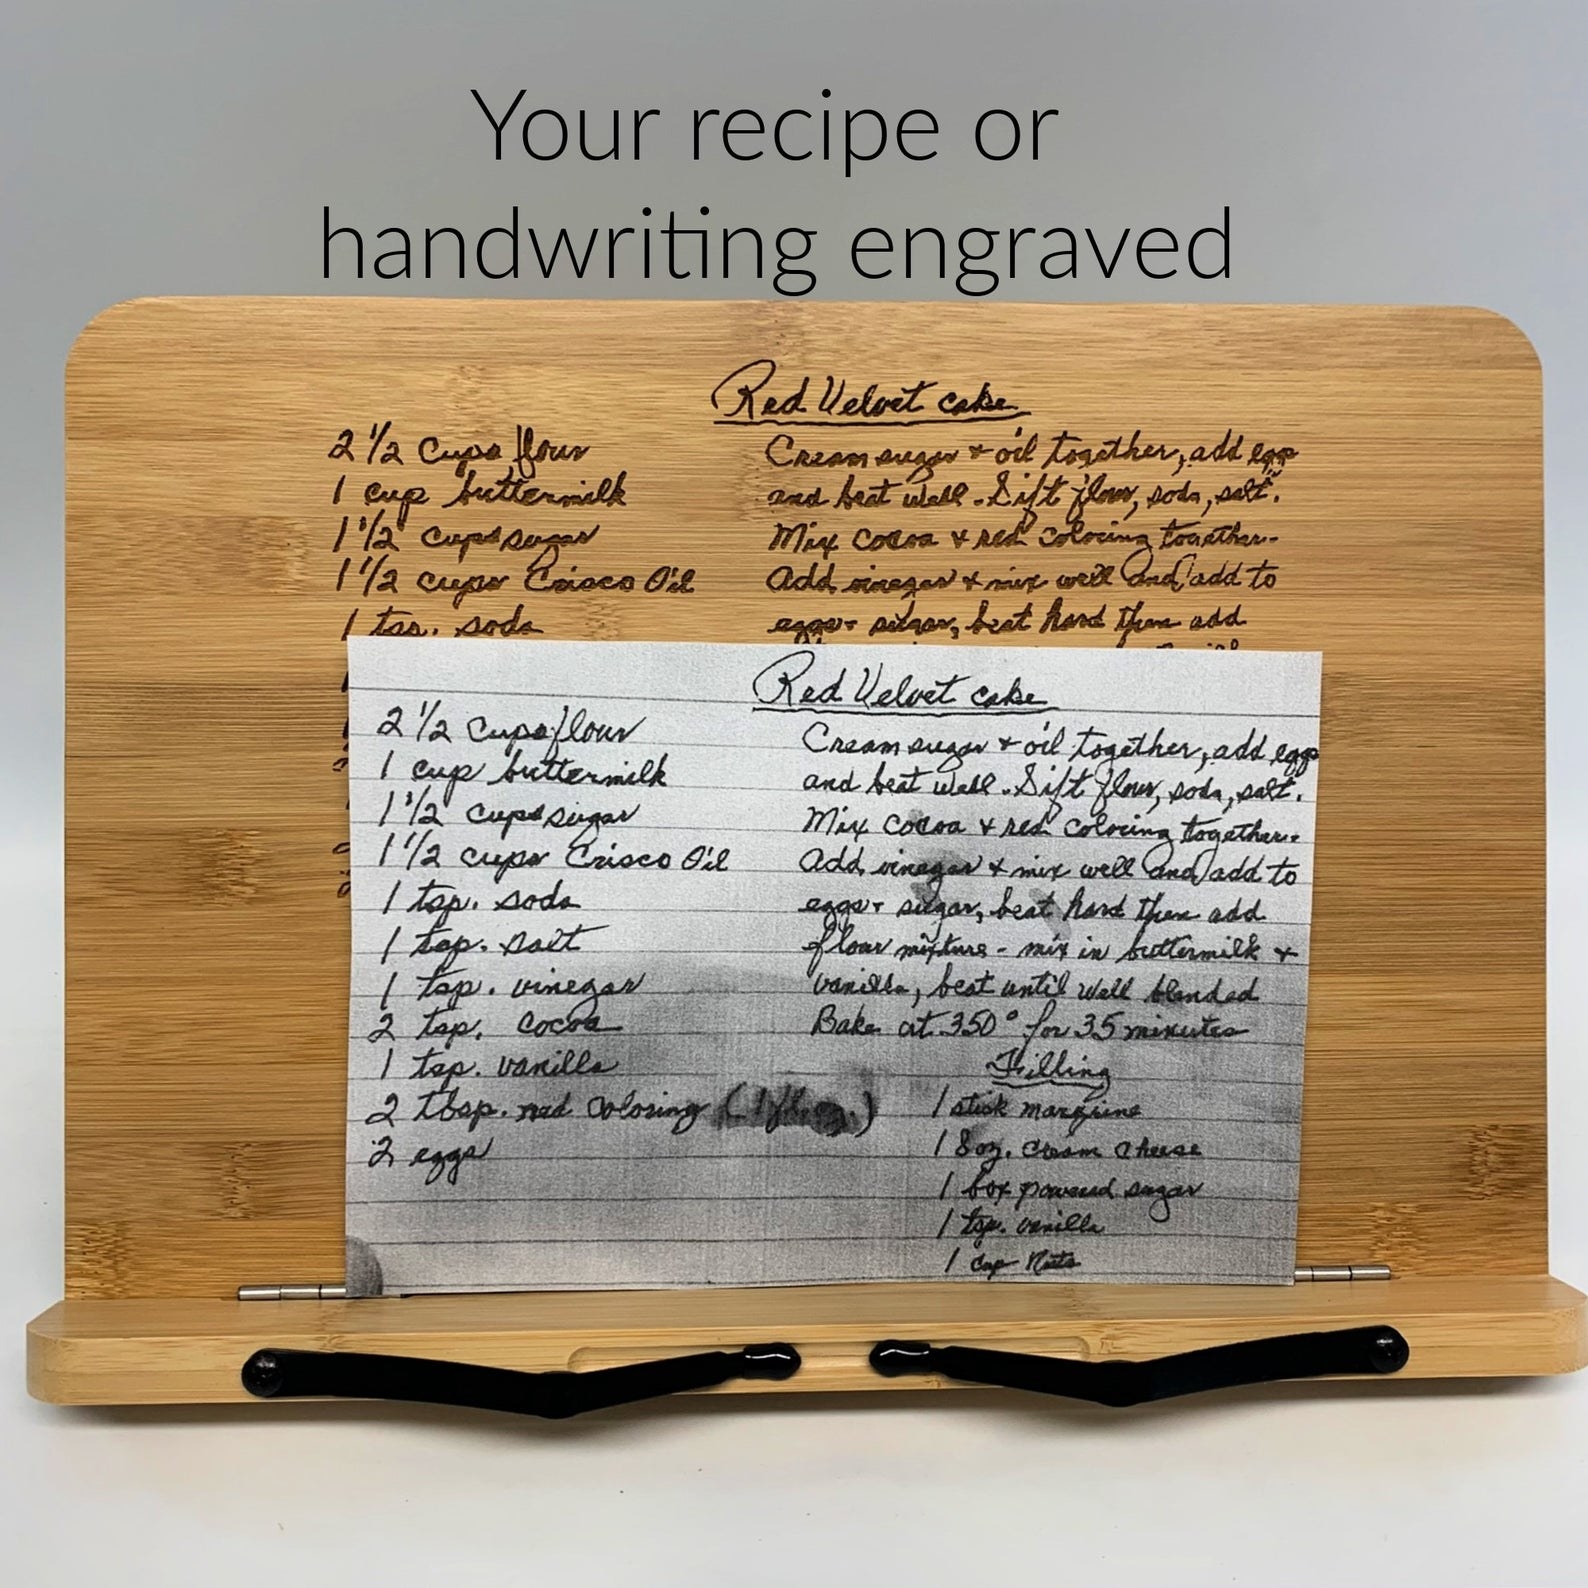 The engraved cookbook stand